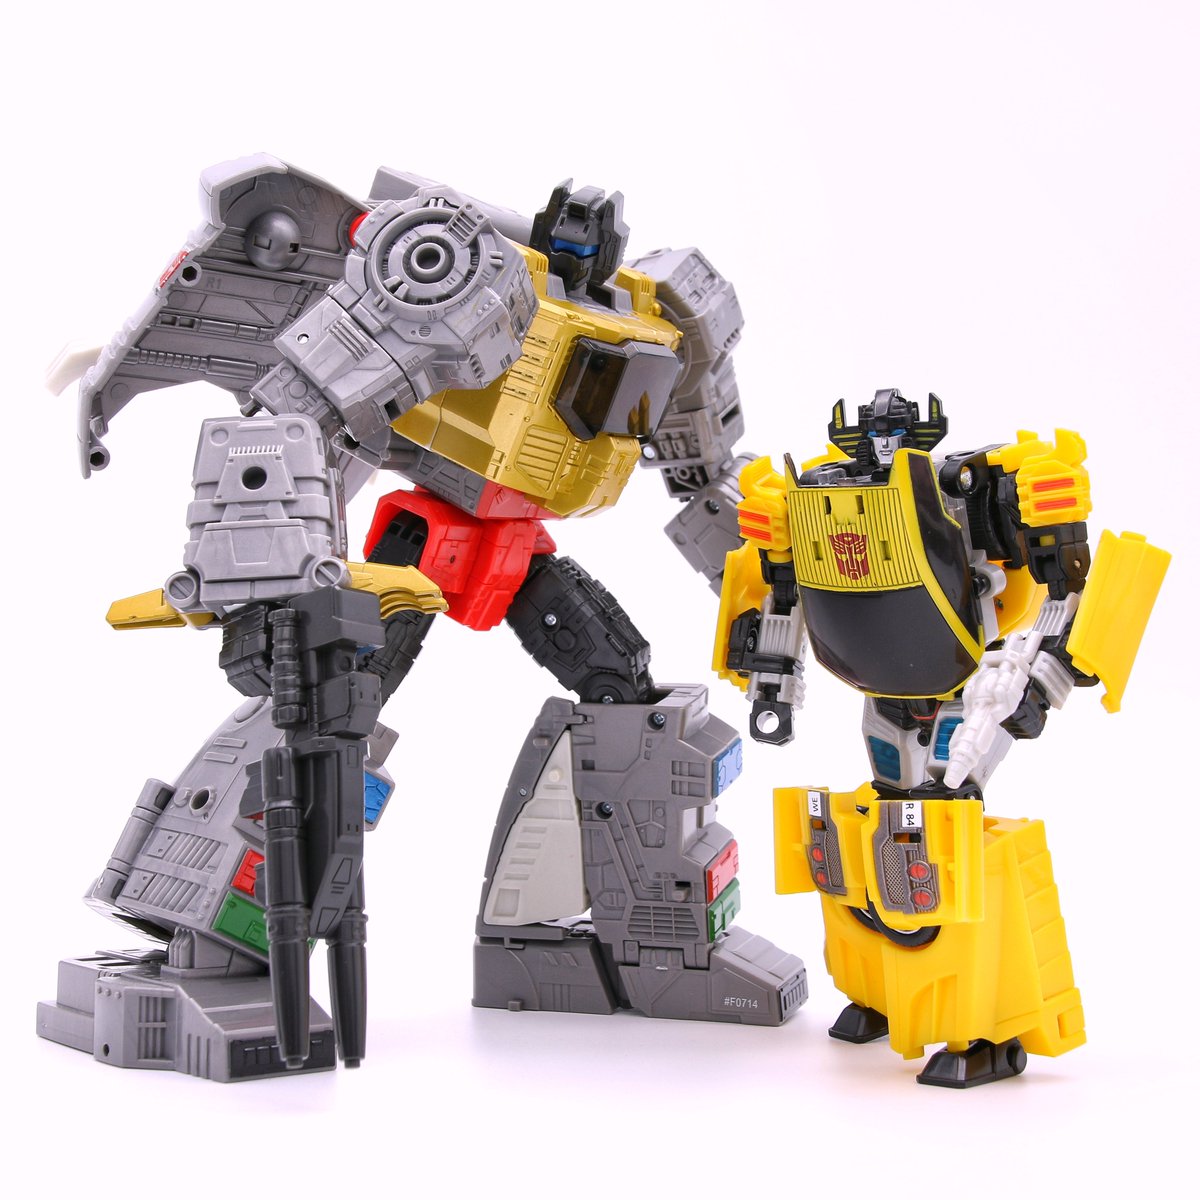 Grimlock and Sunstreaker!

#transformers #toyphotography